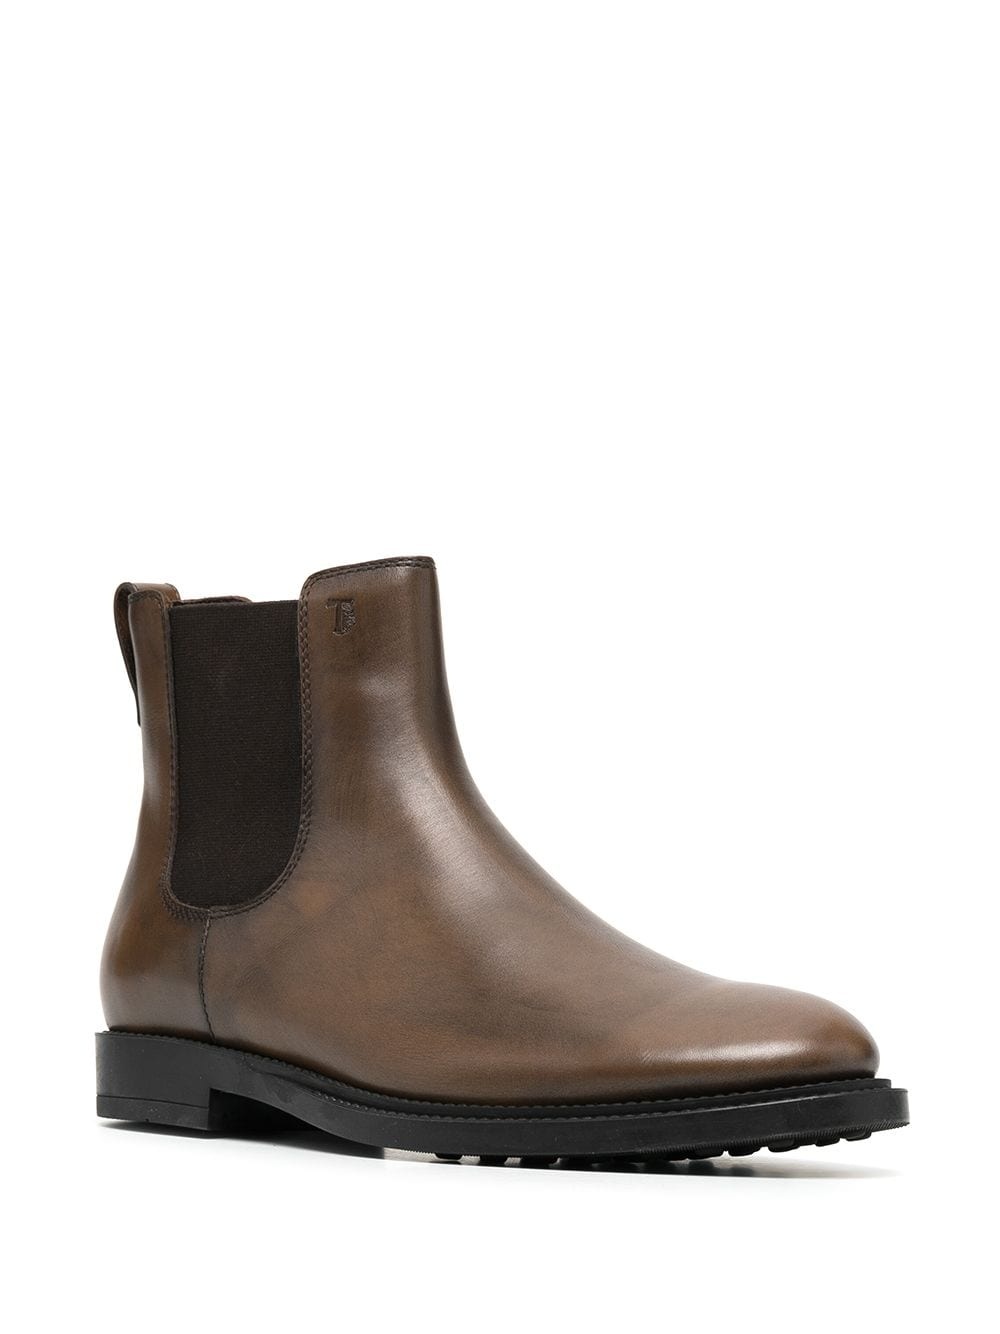 round toe chelsea boots - 2